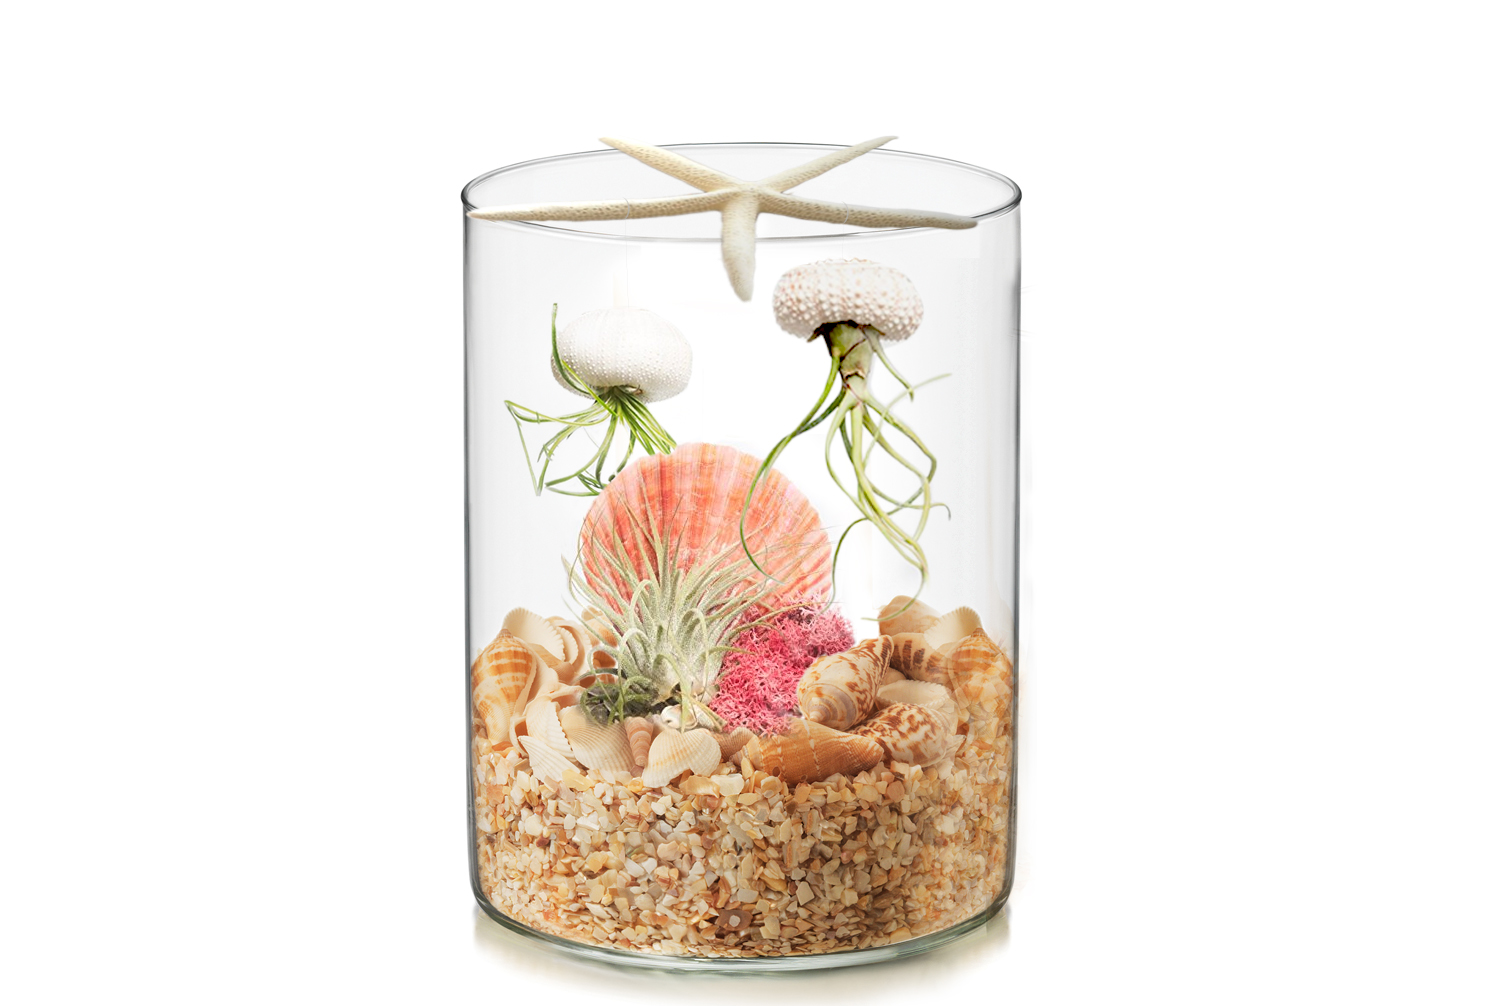 A Jellyfish Under the Sea Terrarium plant nite project by Yaymaker